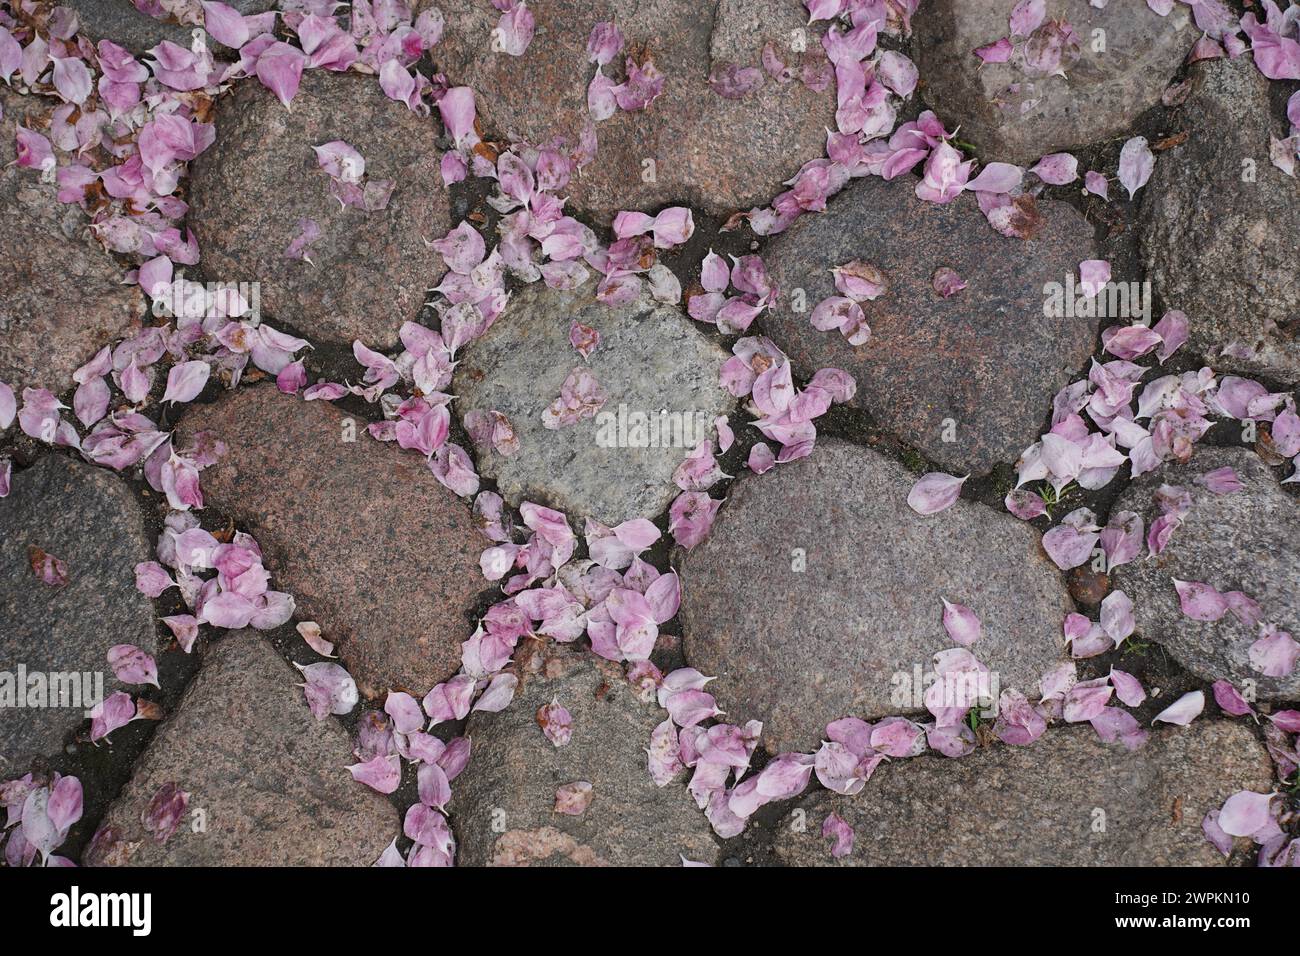 Close-up of pink cherry blossom petals falling on stone pavement during flowering in spring Stock Photo